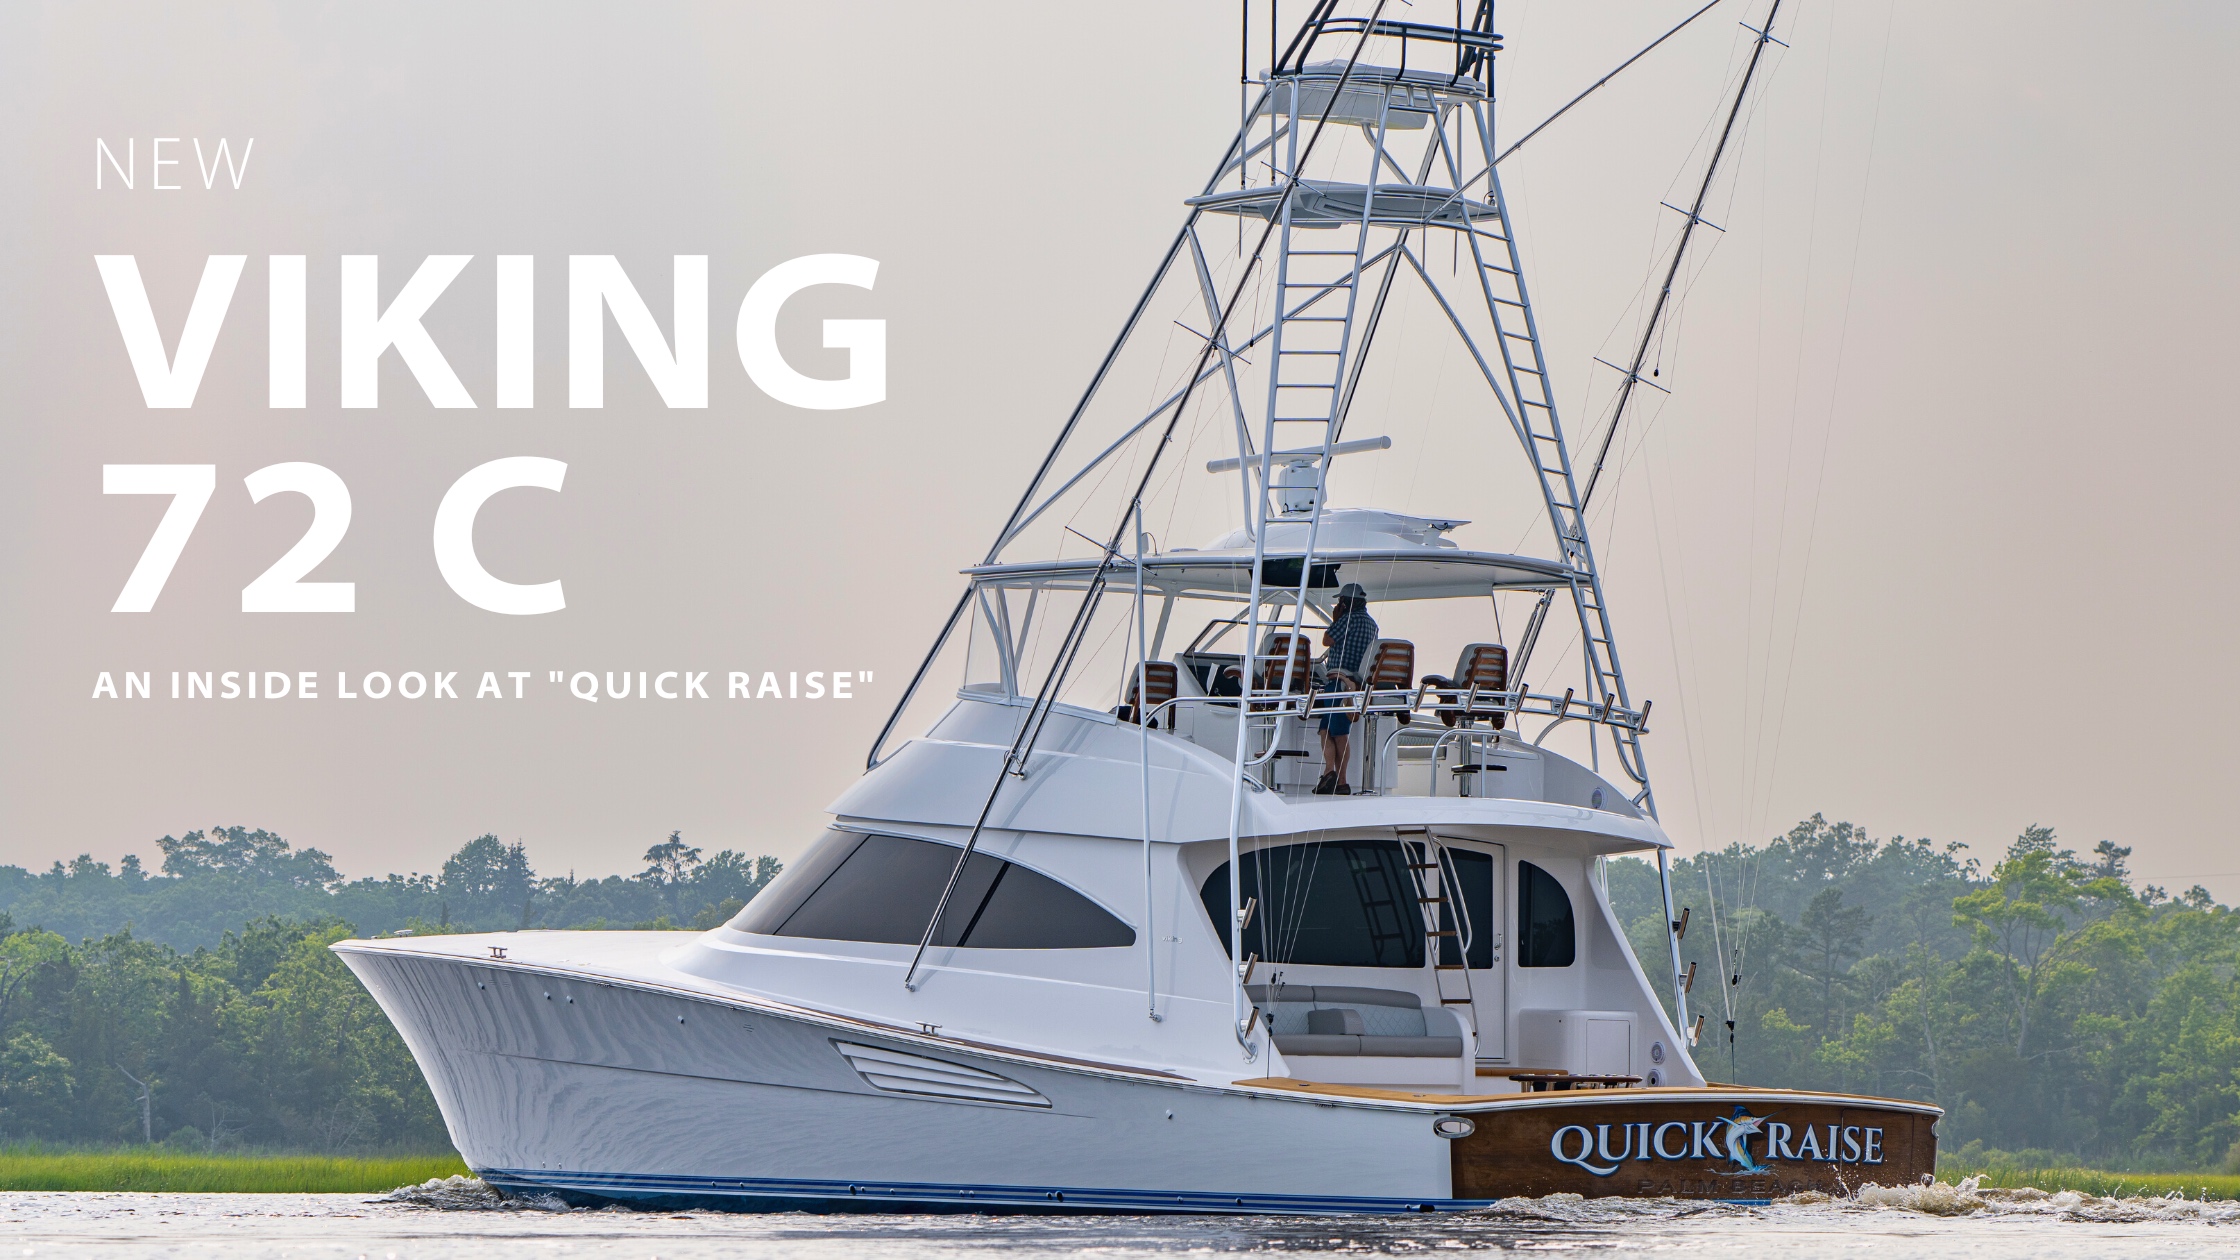 An Inside Look: The Just Delivered Viking 72’ C “Quick Raise”